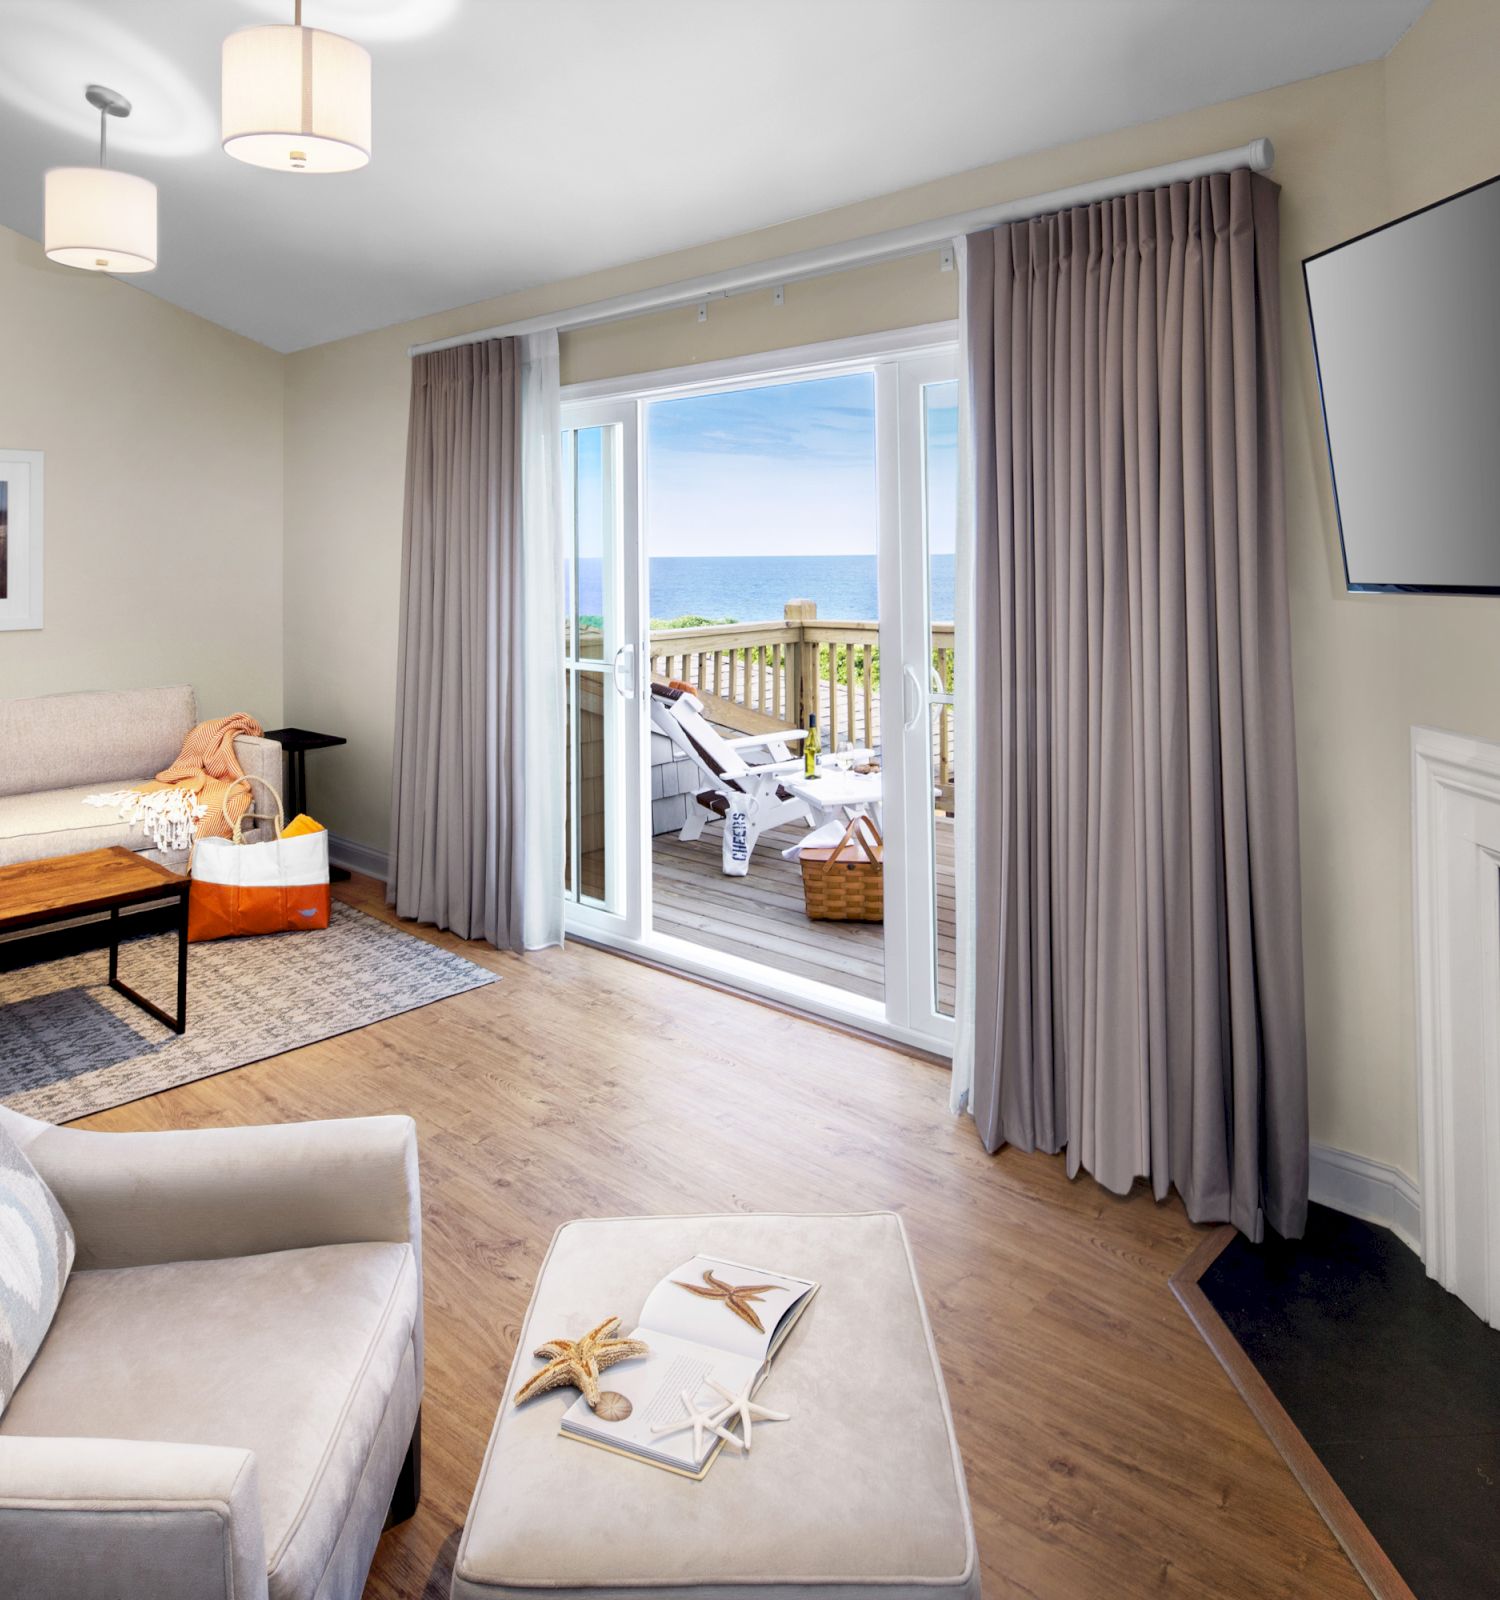 Sanderling Resort's cozy guest hotel presidential suite with a fireplace, living area and tv.